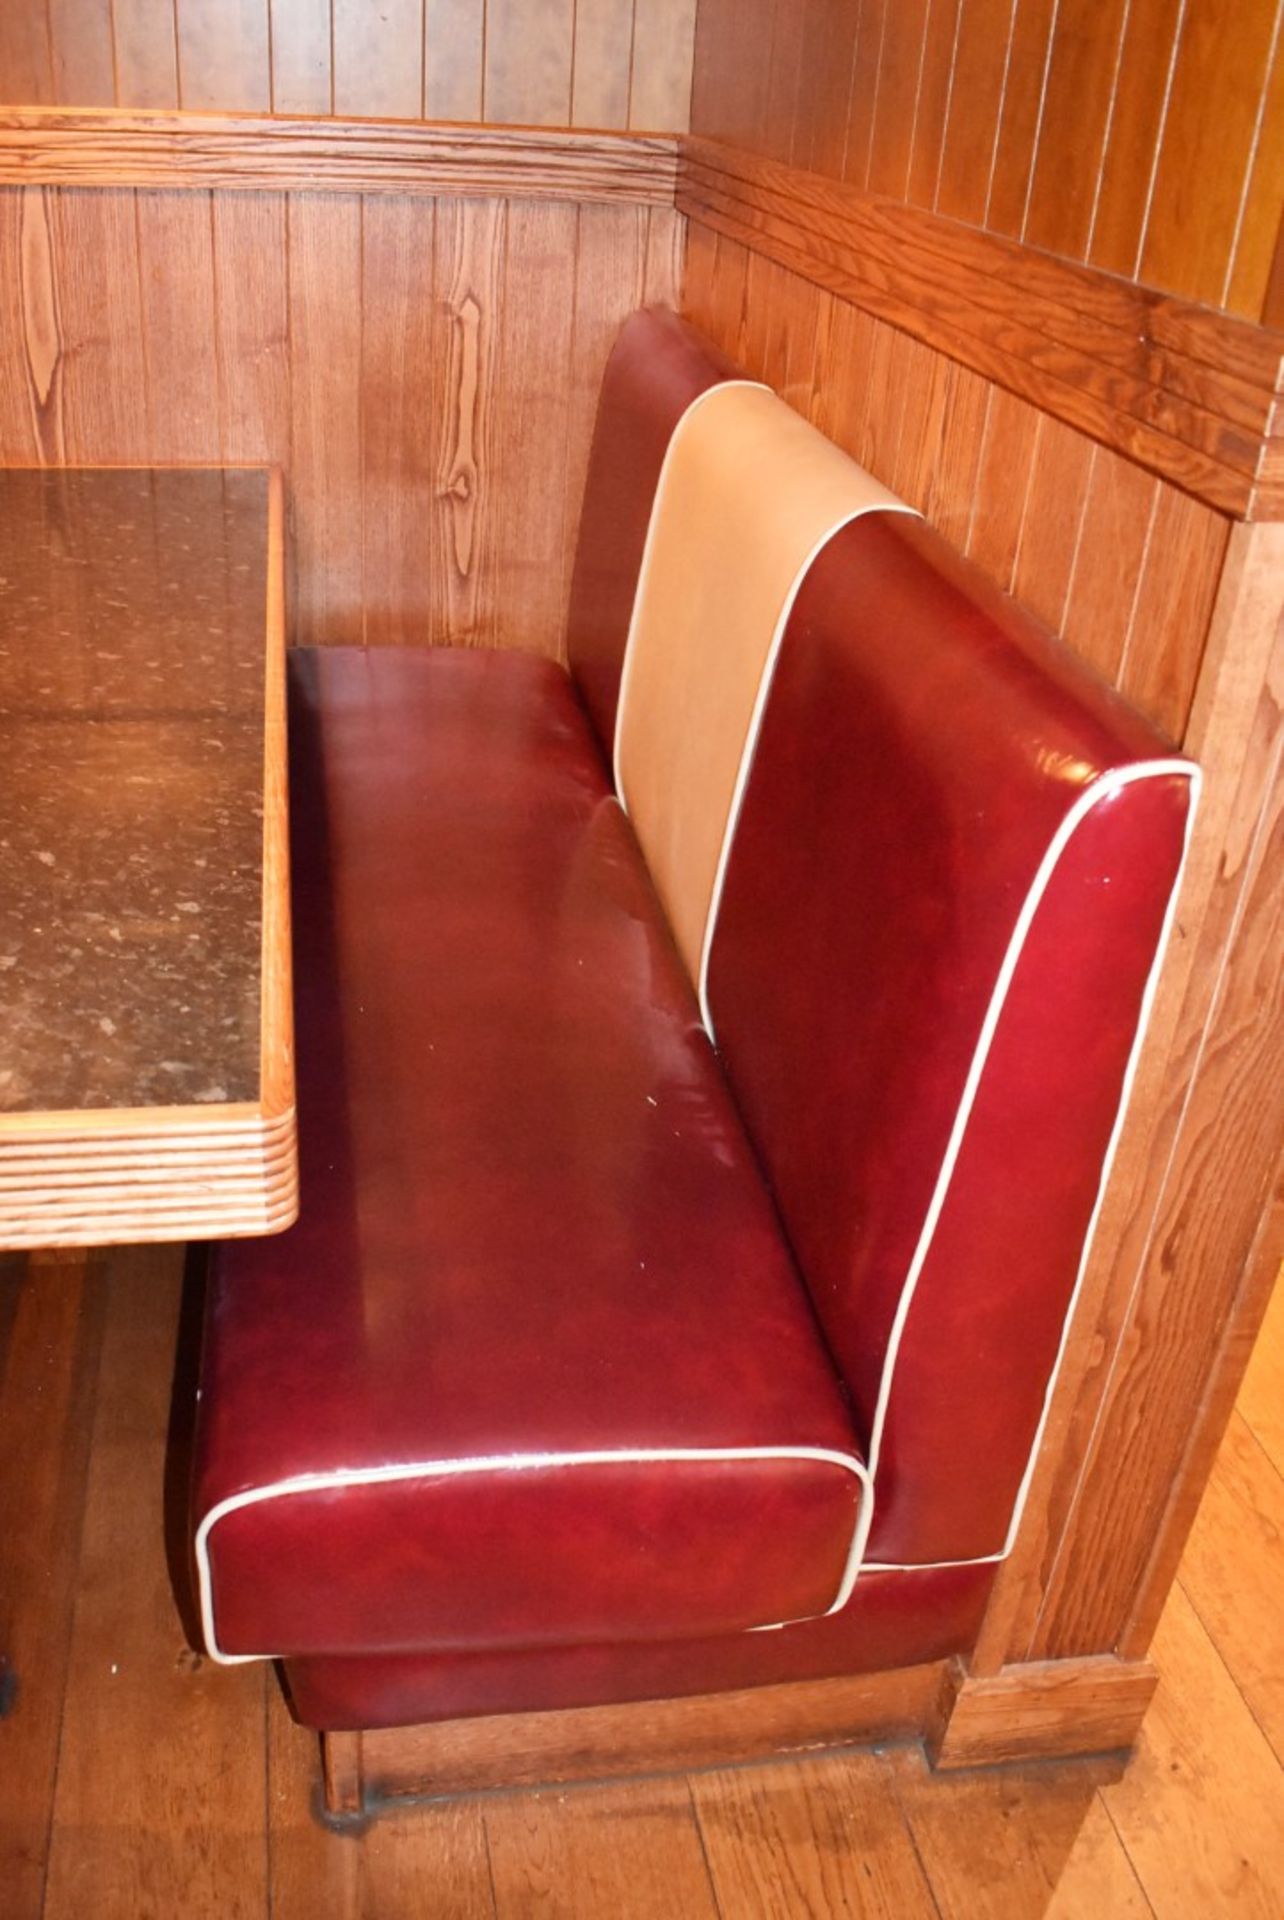 A Pair Of 3-Seater Single-sided Seating Benches to Seat Upto 6-Persons - Retro 1950's American Diner - Image 3 of 4